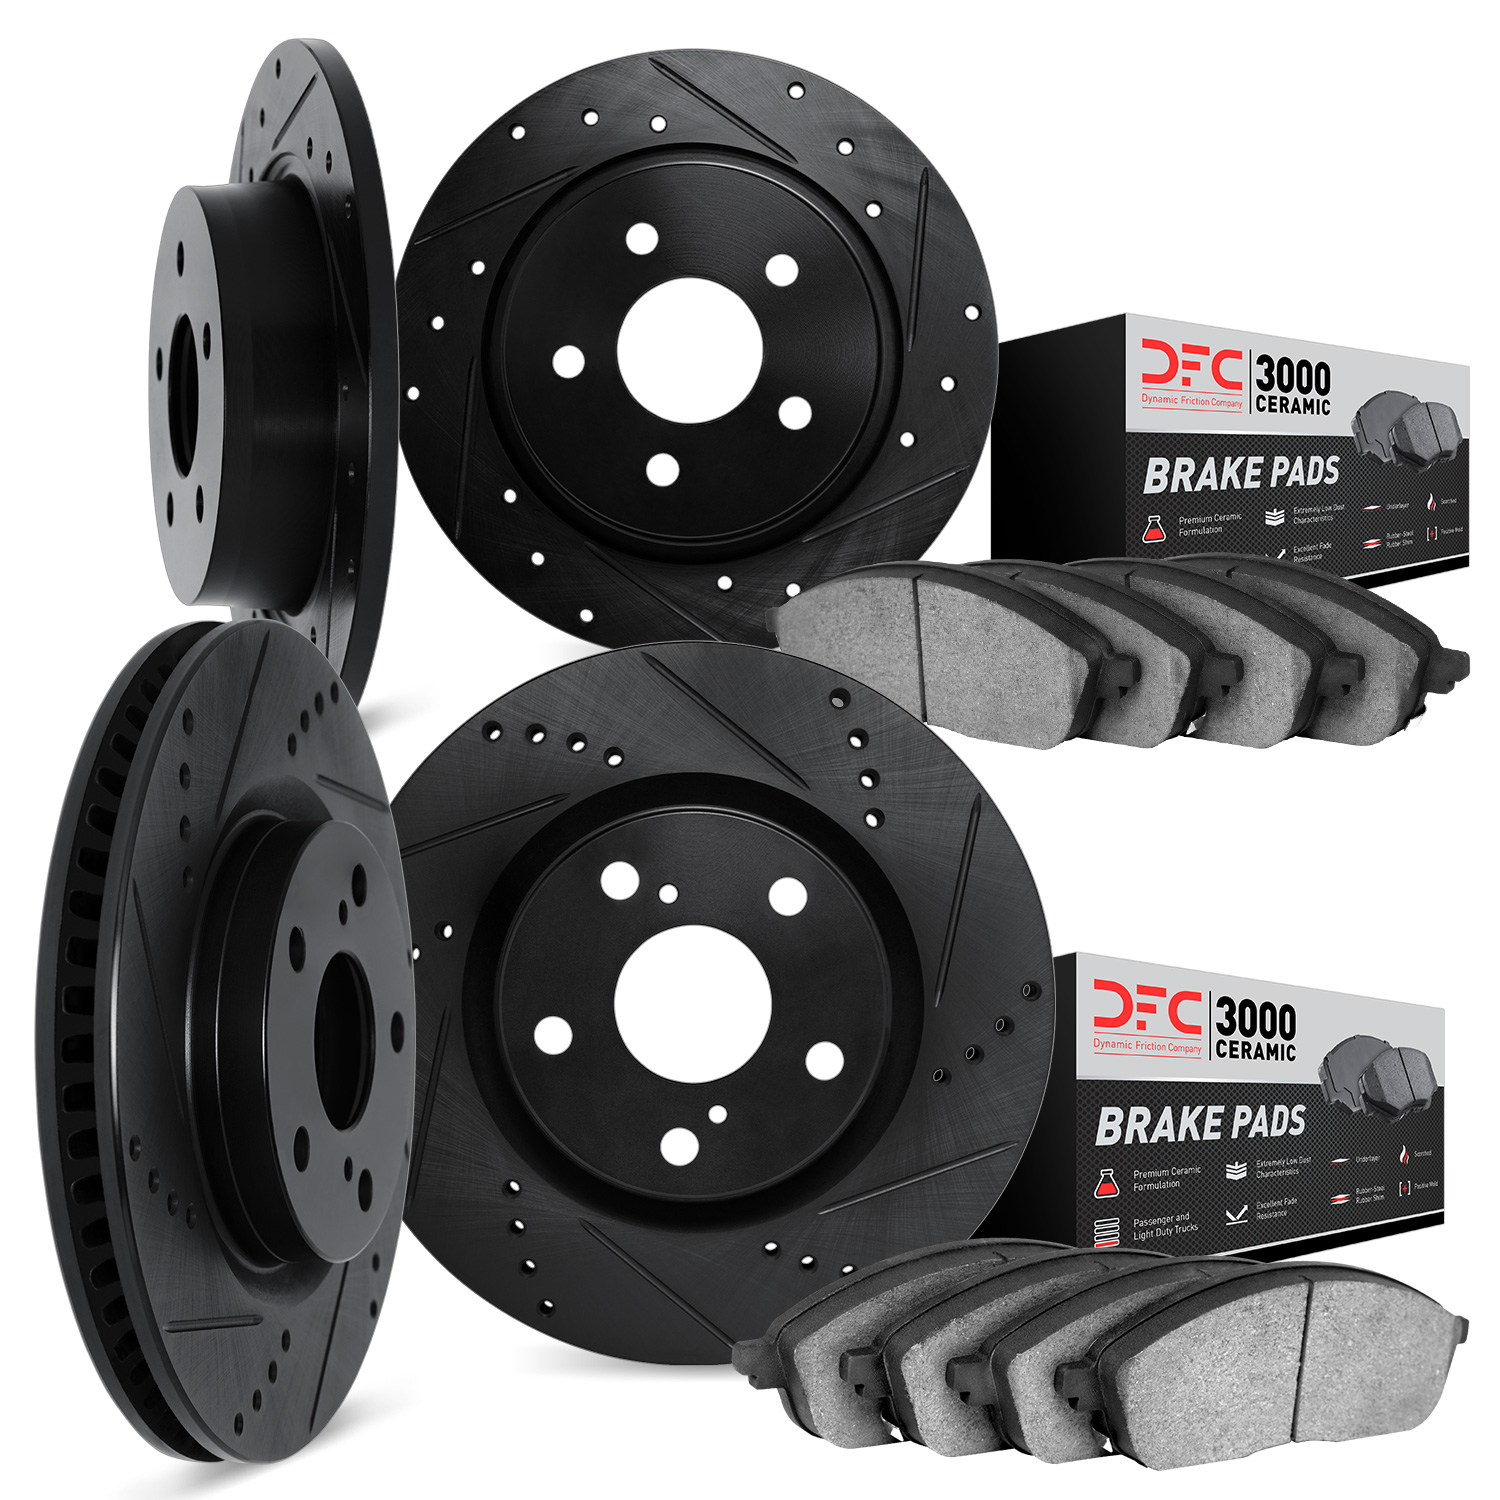 8304-39025 Drilled/Slotted Brake Rotors with 3000-Series Ceramic Brake Pads Kit [Black], 2015-2017 Mopar, Position: Front and Re